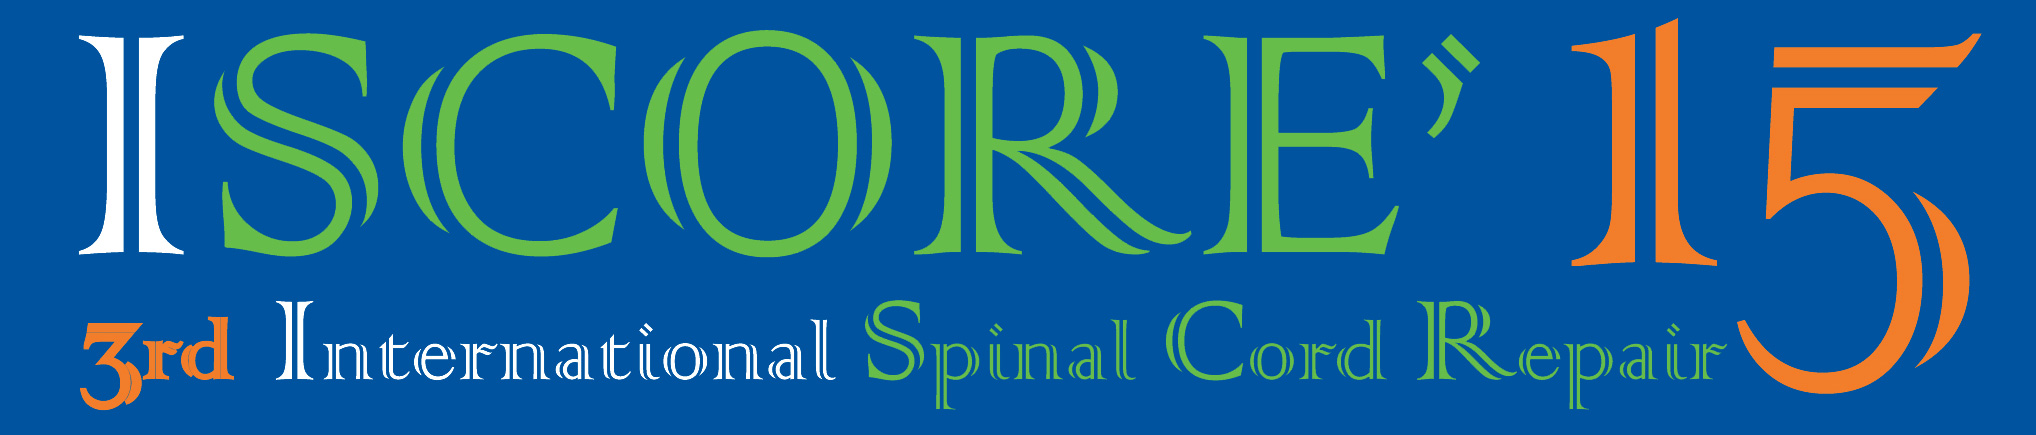 Spinal Cord Meeting